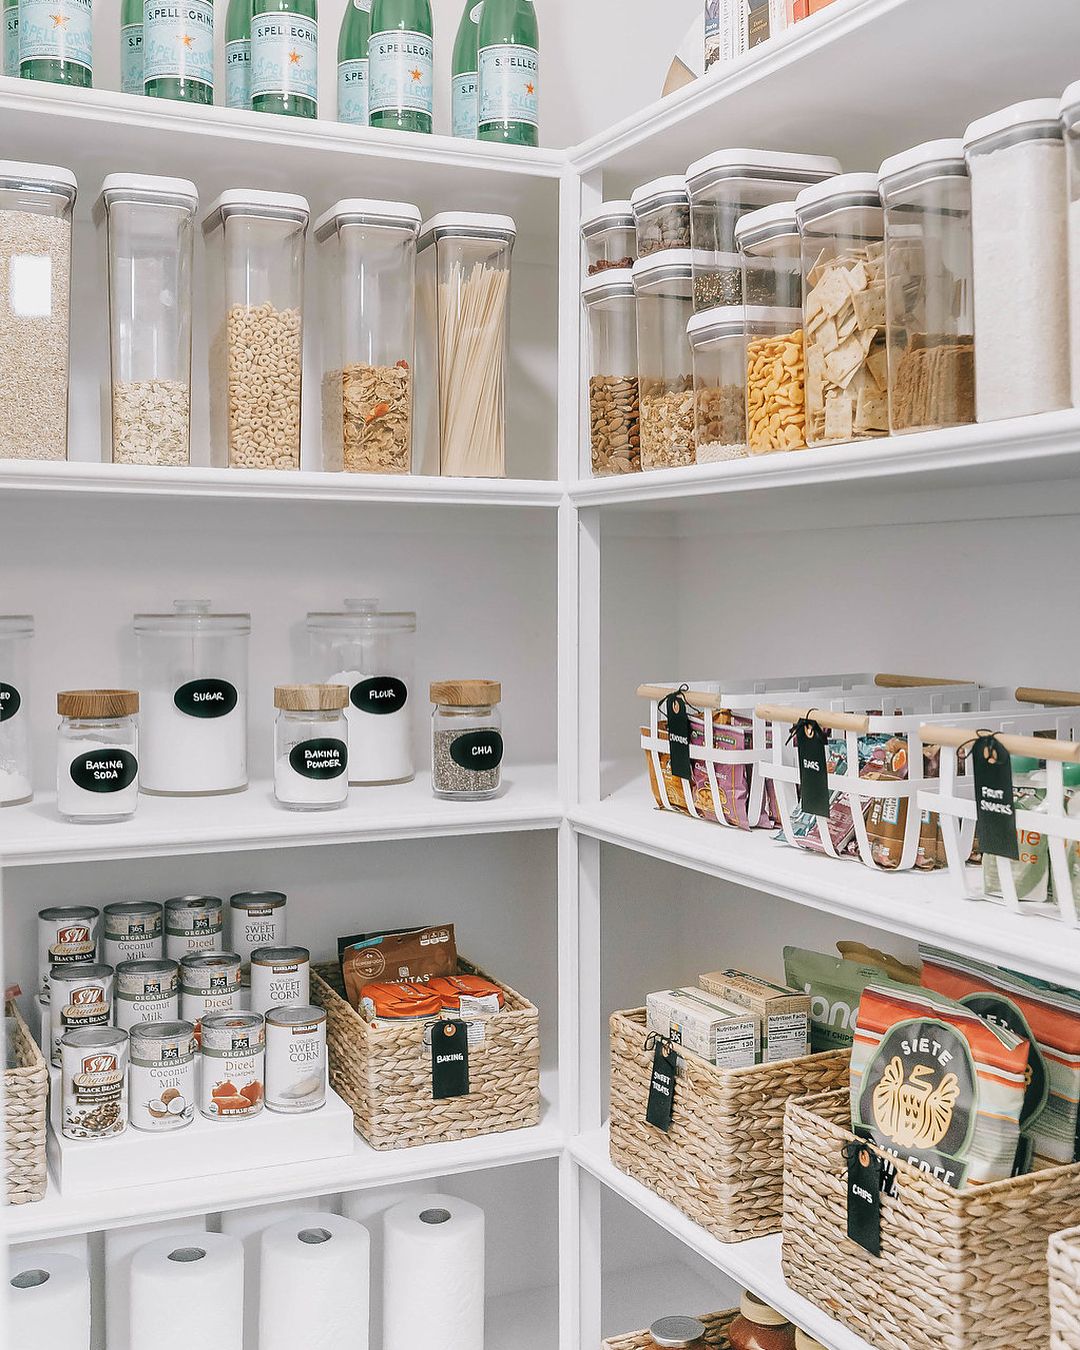 Organized Pantry with Clear Containers and Labels. Photo by Instagram user @mikaperry